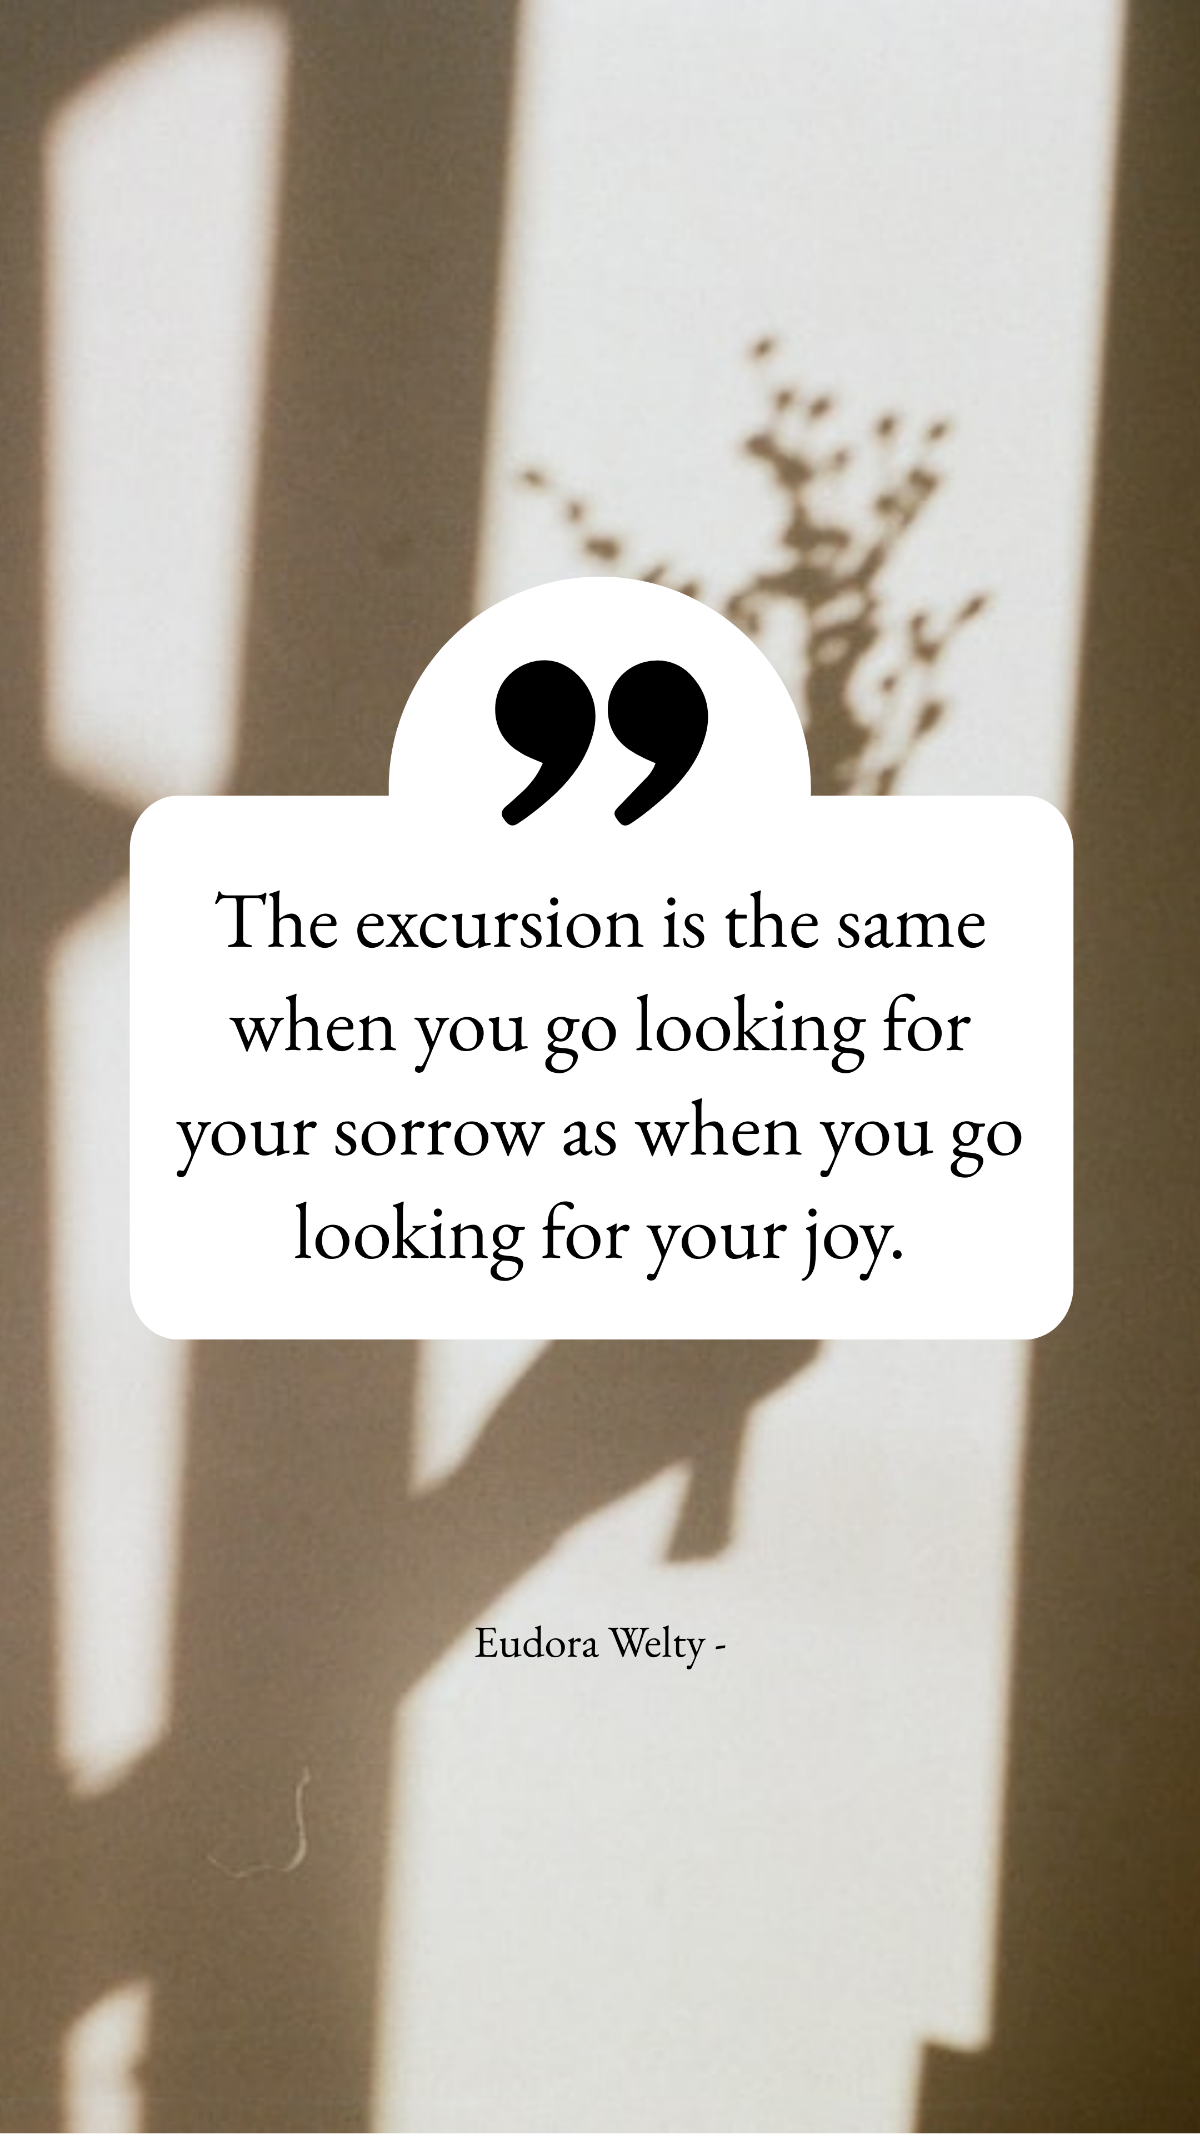 Eudora Welty - The excursion is the same when you go looking for your sorrow as when you go looking for your joy. Template